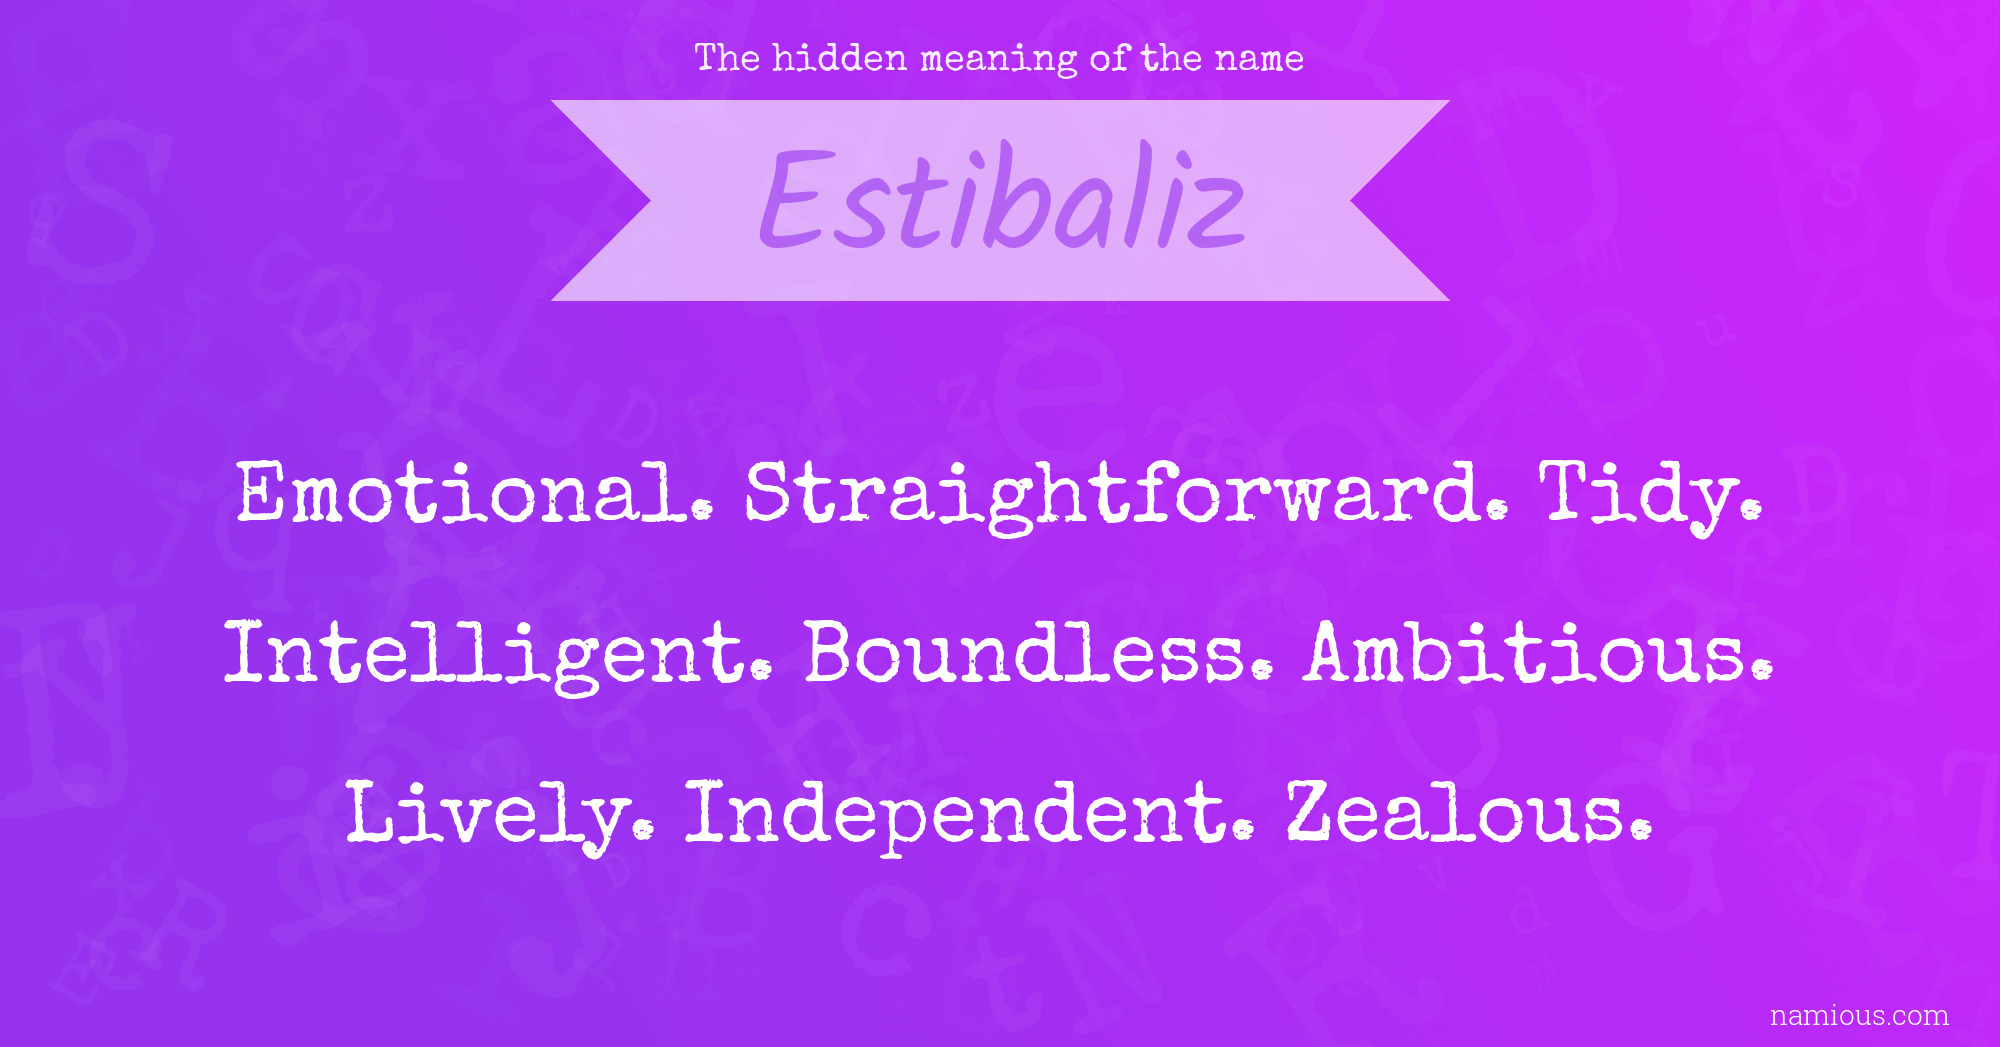 The hidden meaning of the name Estibaliz